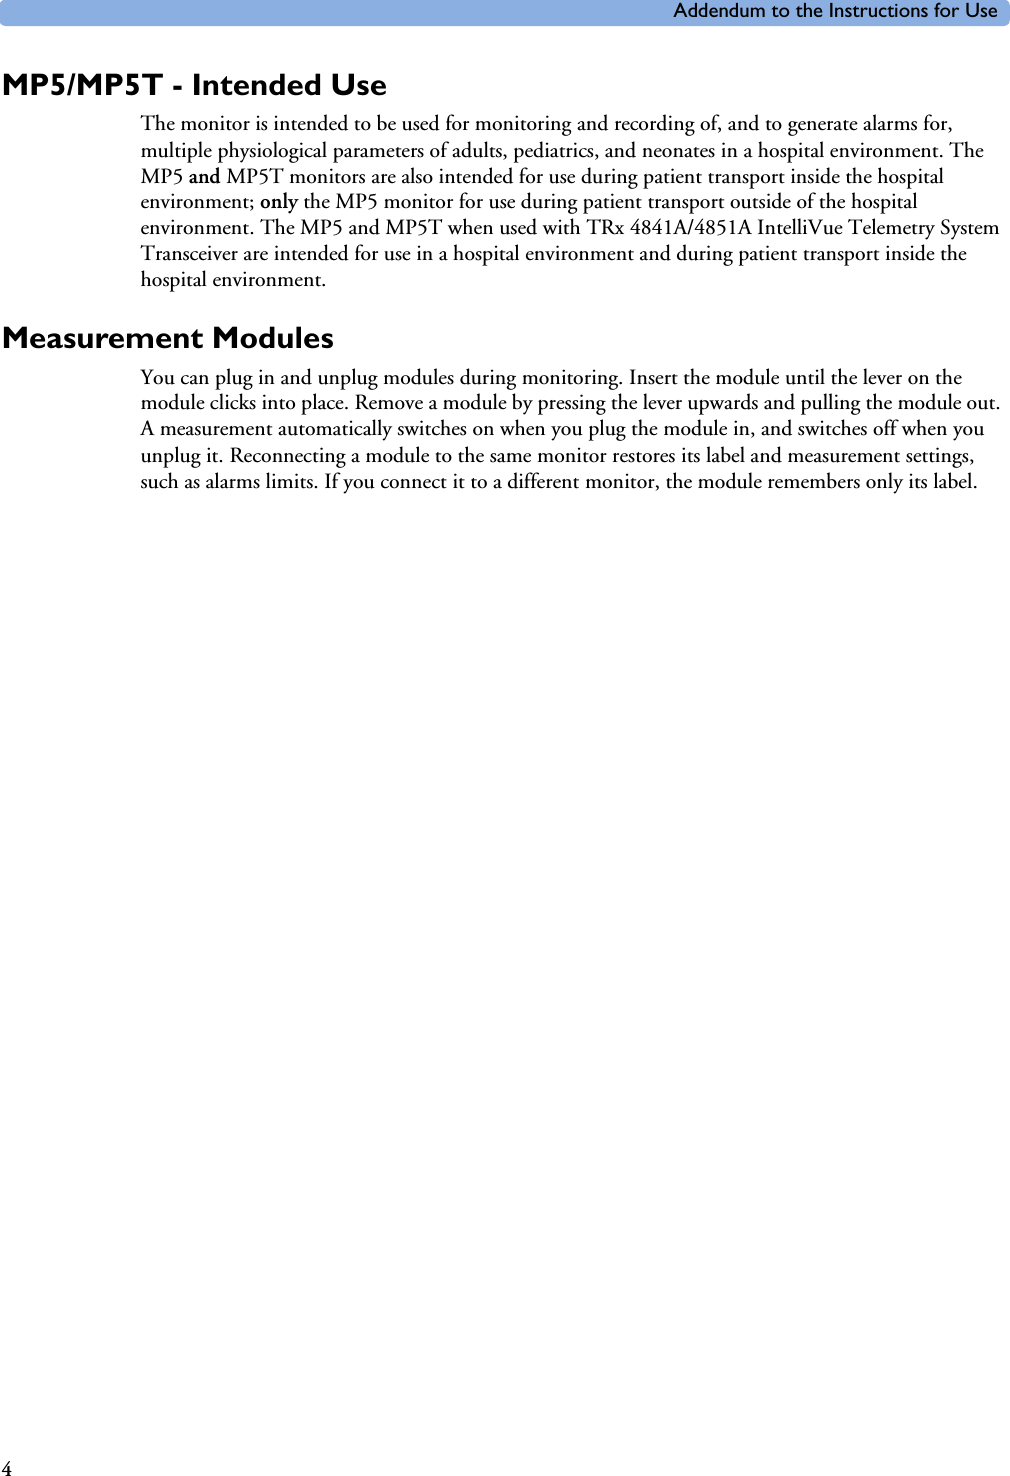 Addendum to the Instructions for Use4MP5/MP5T - Intended UseThe monitor is intended to be used for monitoring and recording of, and to generate alarms for, multiple physiological parameters of adults, pediatrics, and neonates in a hospital environment. The MP5 and MP5T monitors are also intended for use during patient transport inside the hospital environment; only the MP5 monitor for use during patient transport outside of the hospital environment. The MP5 and MP5T when used with TRx 4841A/4851A IntelliVue Telemetry System Transceiver are intended for use in a hospital environment and during patient transport inside the hospital environment.Measurement ModulesYou can plug in and unplug modules during monitoring. Insert the module until the lever on the module clicks into place. Remove a module by pressing the lever upwards and pulling the module out. A measurement automatically switches on when you plug the module in, and switches off when you unplug it. Reconnecting a module to the same monitor restores its label and measurement settings, such as alarms limits. If you connect it to a different monitor, the module remembers only its label.